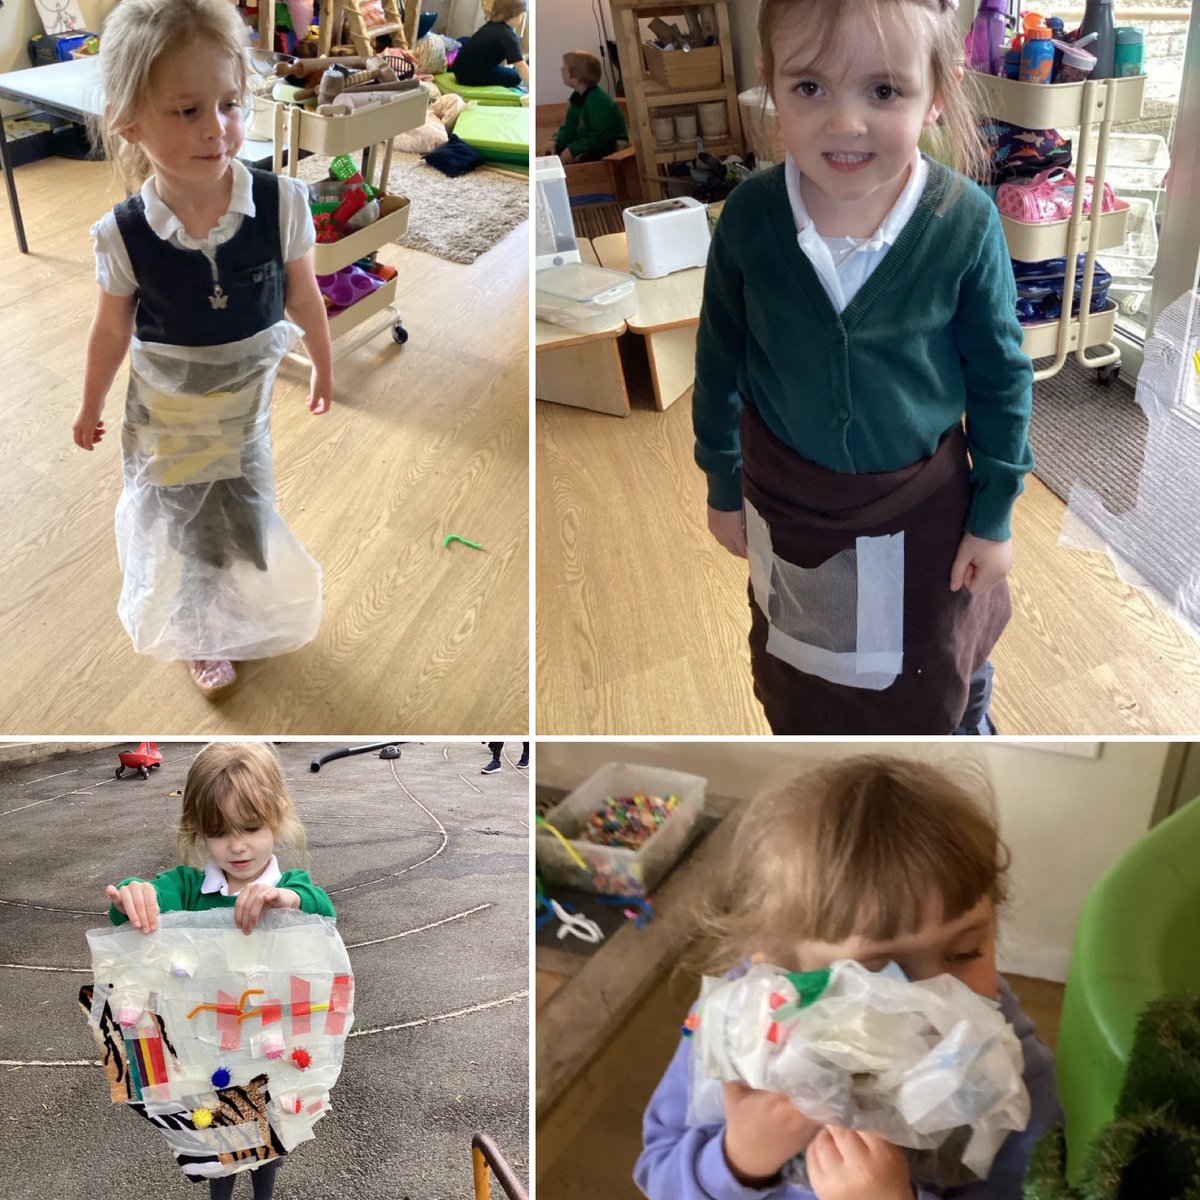 A busy group of Tiny Acorns decided to explore the fabric: cutting, adding decorations and finding ways to hold pieces together. Making blankets, pillows and skirts- I like the brown skirt with a pocket! Lovely to see them checking they would fit them and making adjustments!